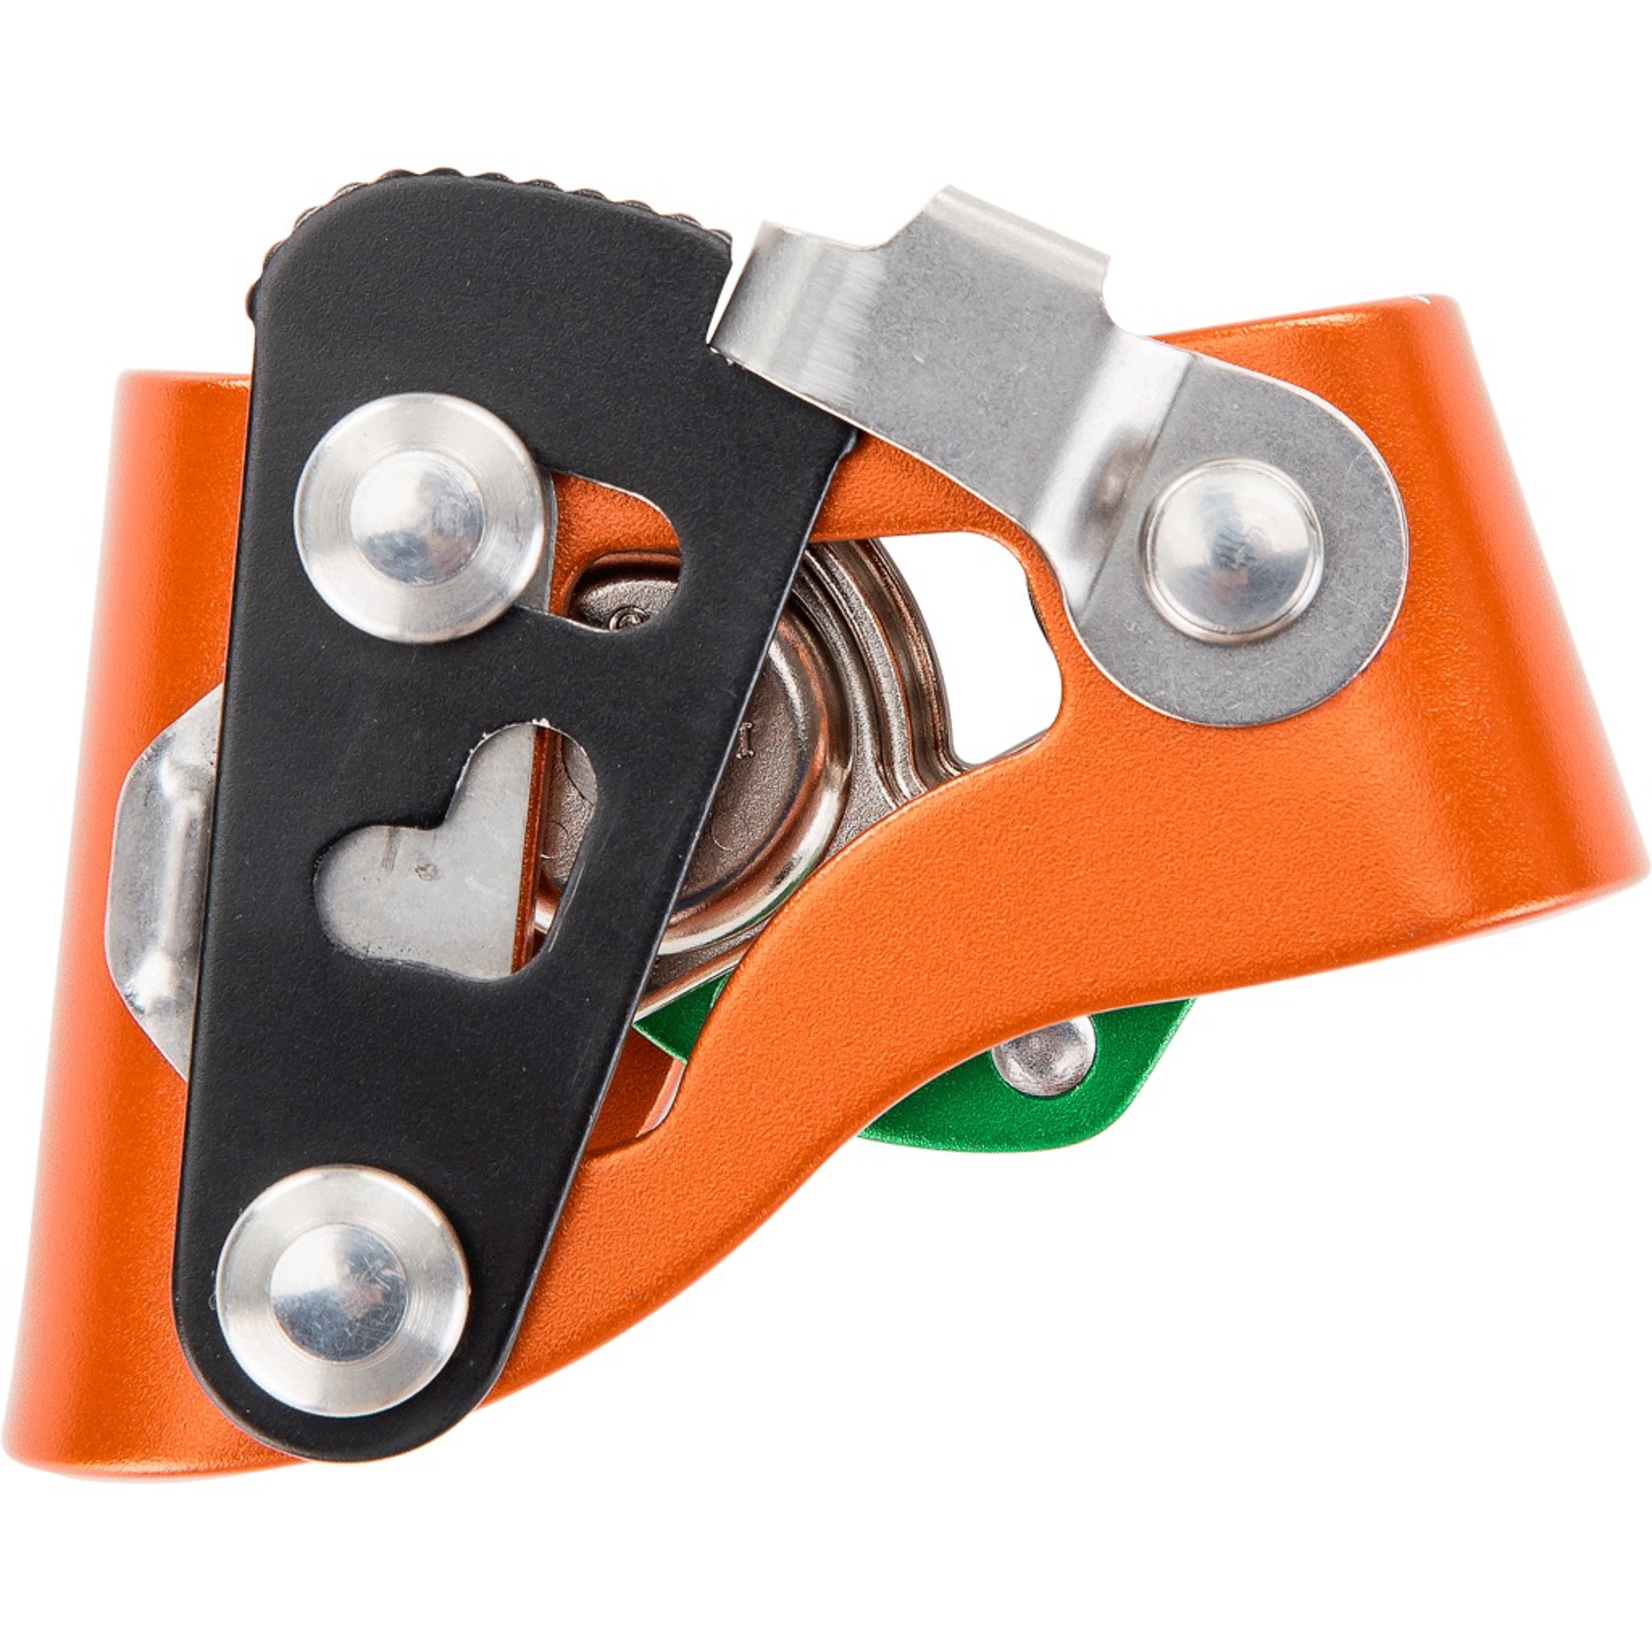 Climbing Technology CT - Quick Tree Removable Foot Ascender Right - Orange